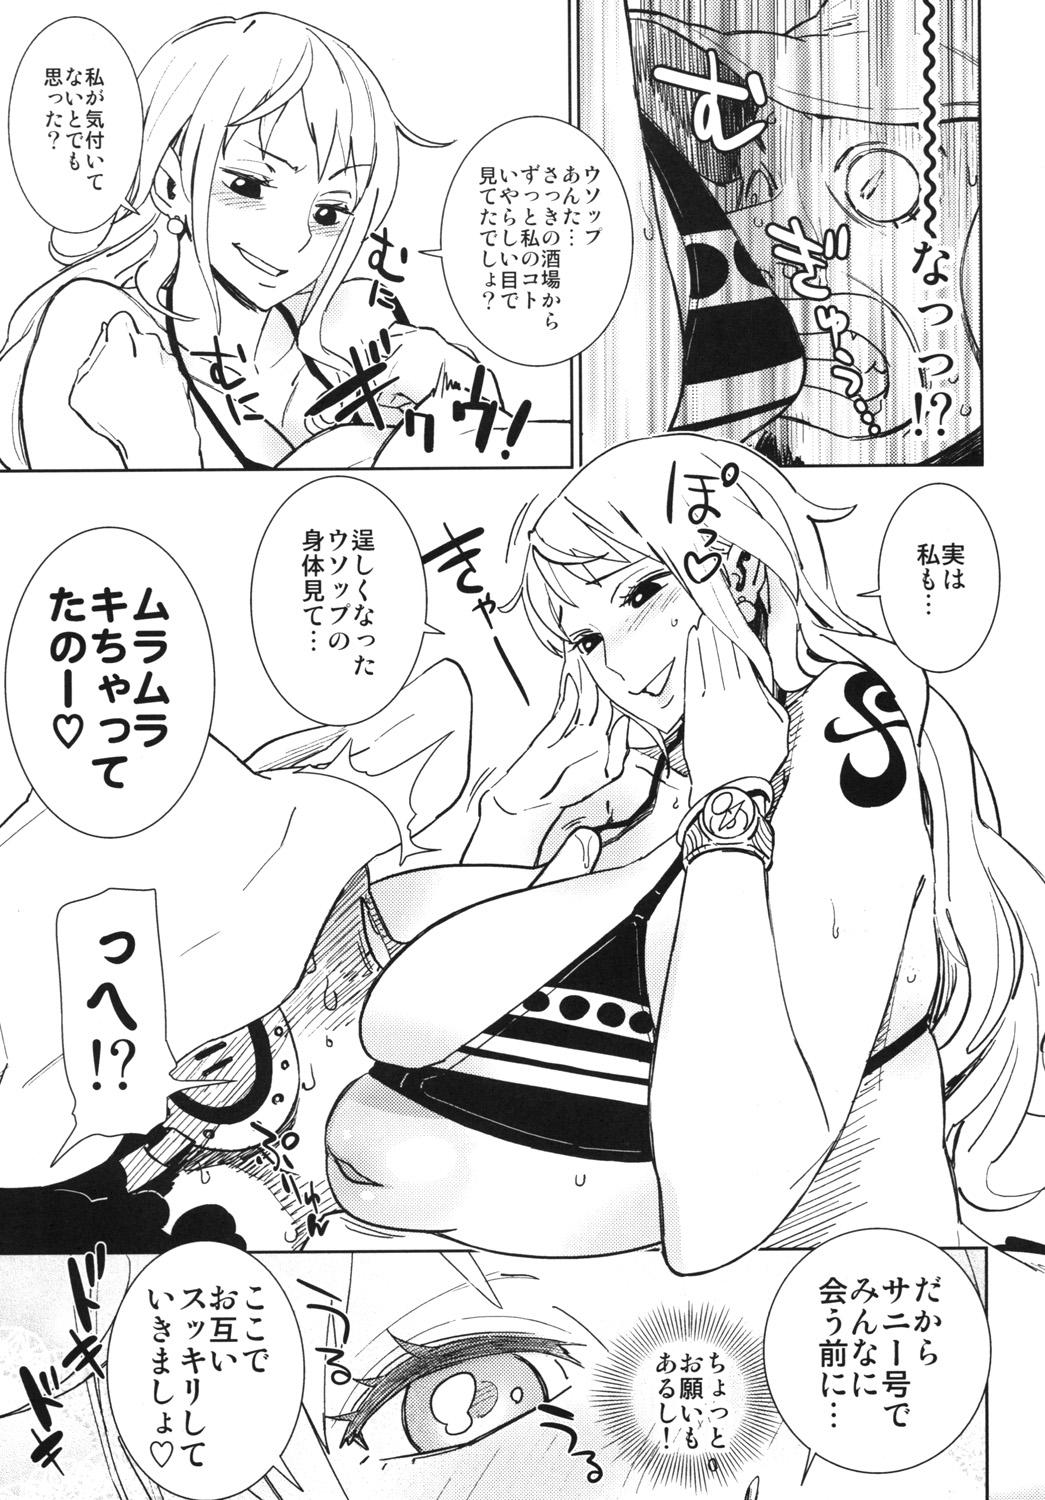 Tongue EROMANCE DAWN - One piece 3some - Page 7